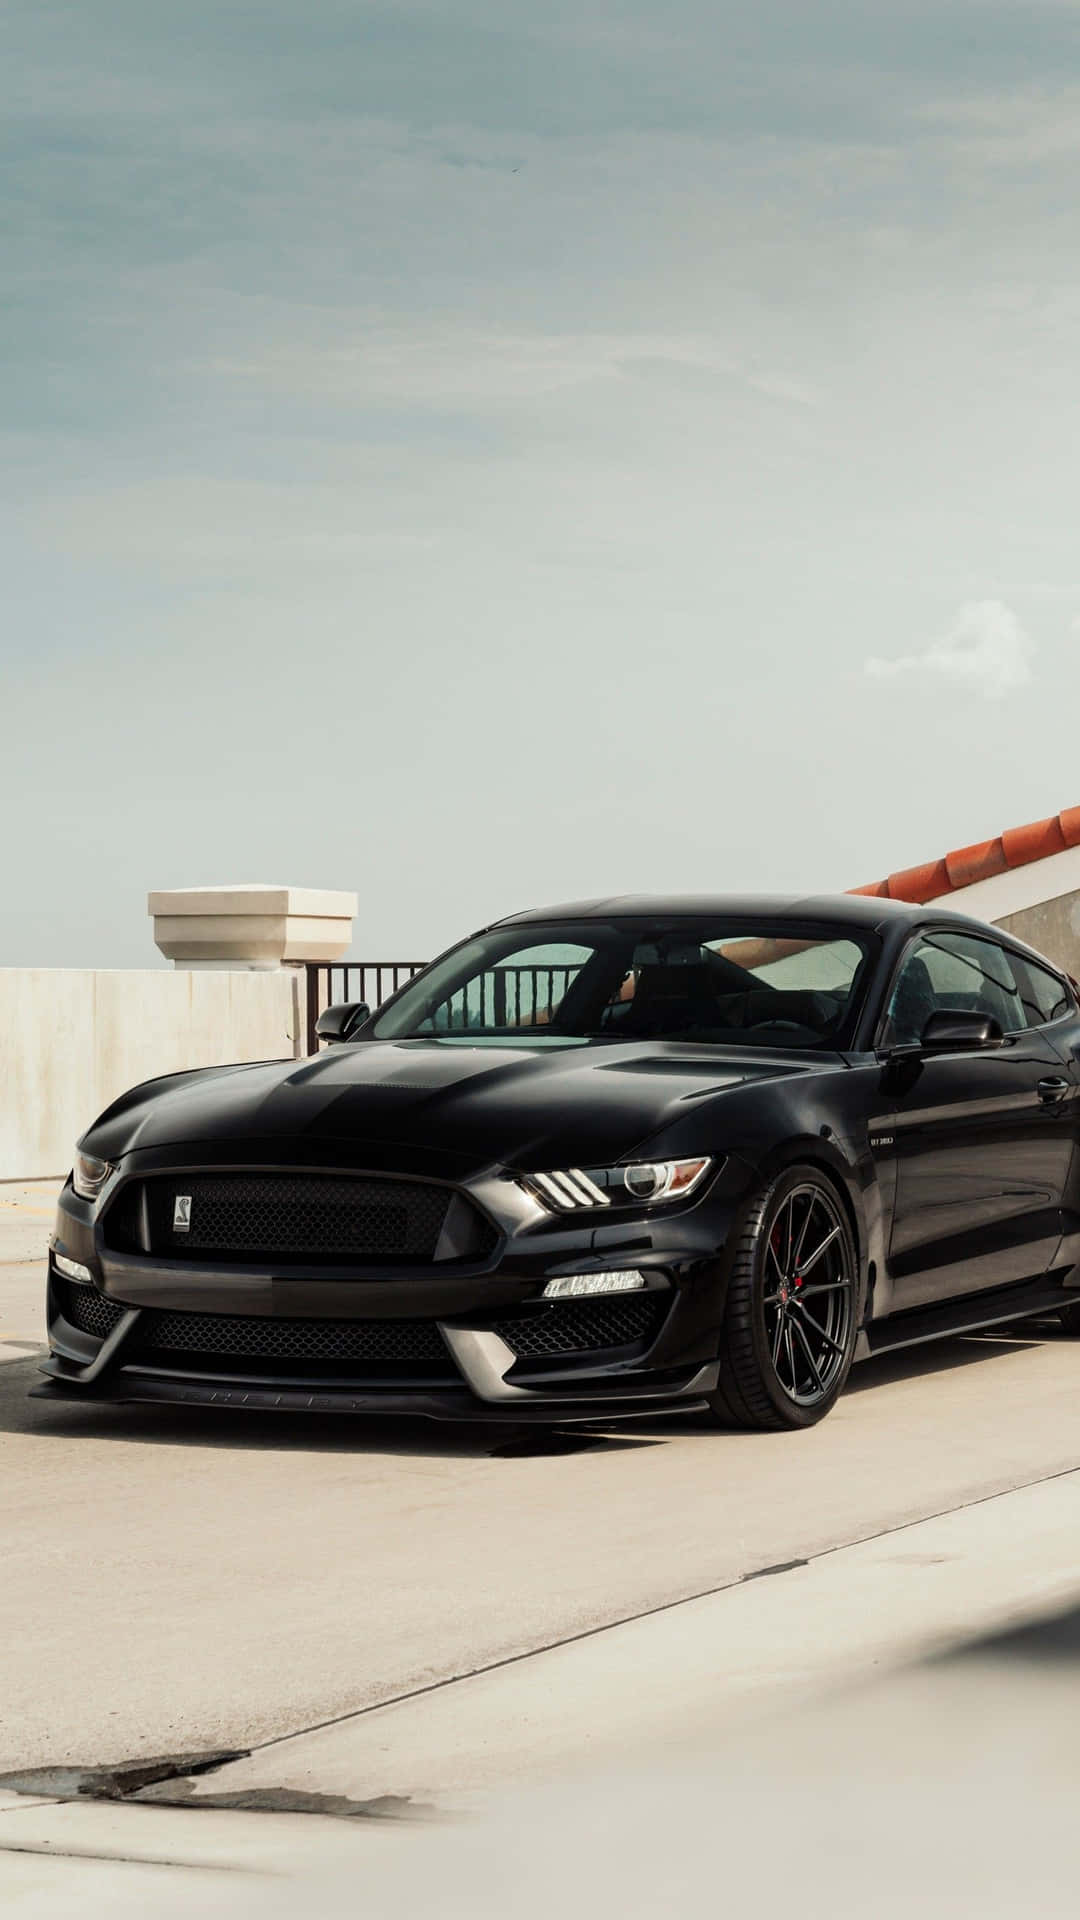 The Black Mustang Gt Is Parked On The Side Of The Road Wallpaper